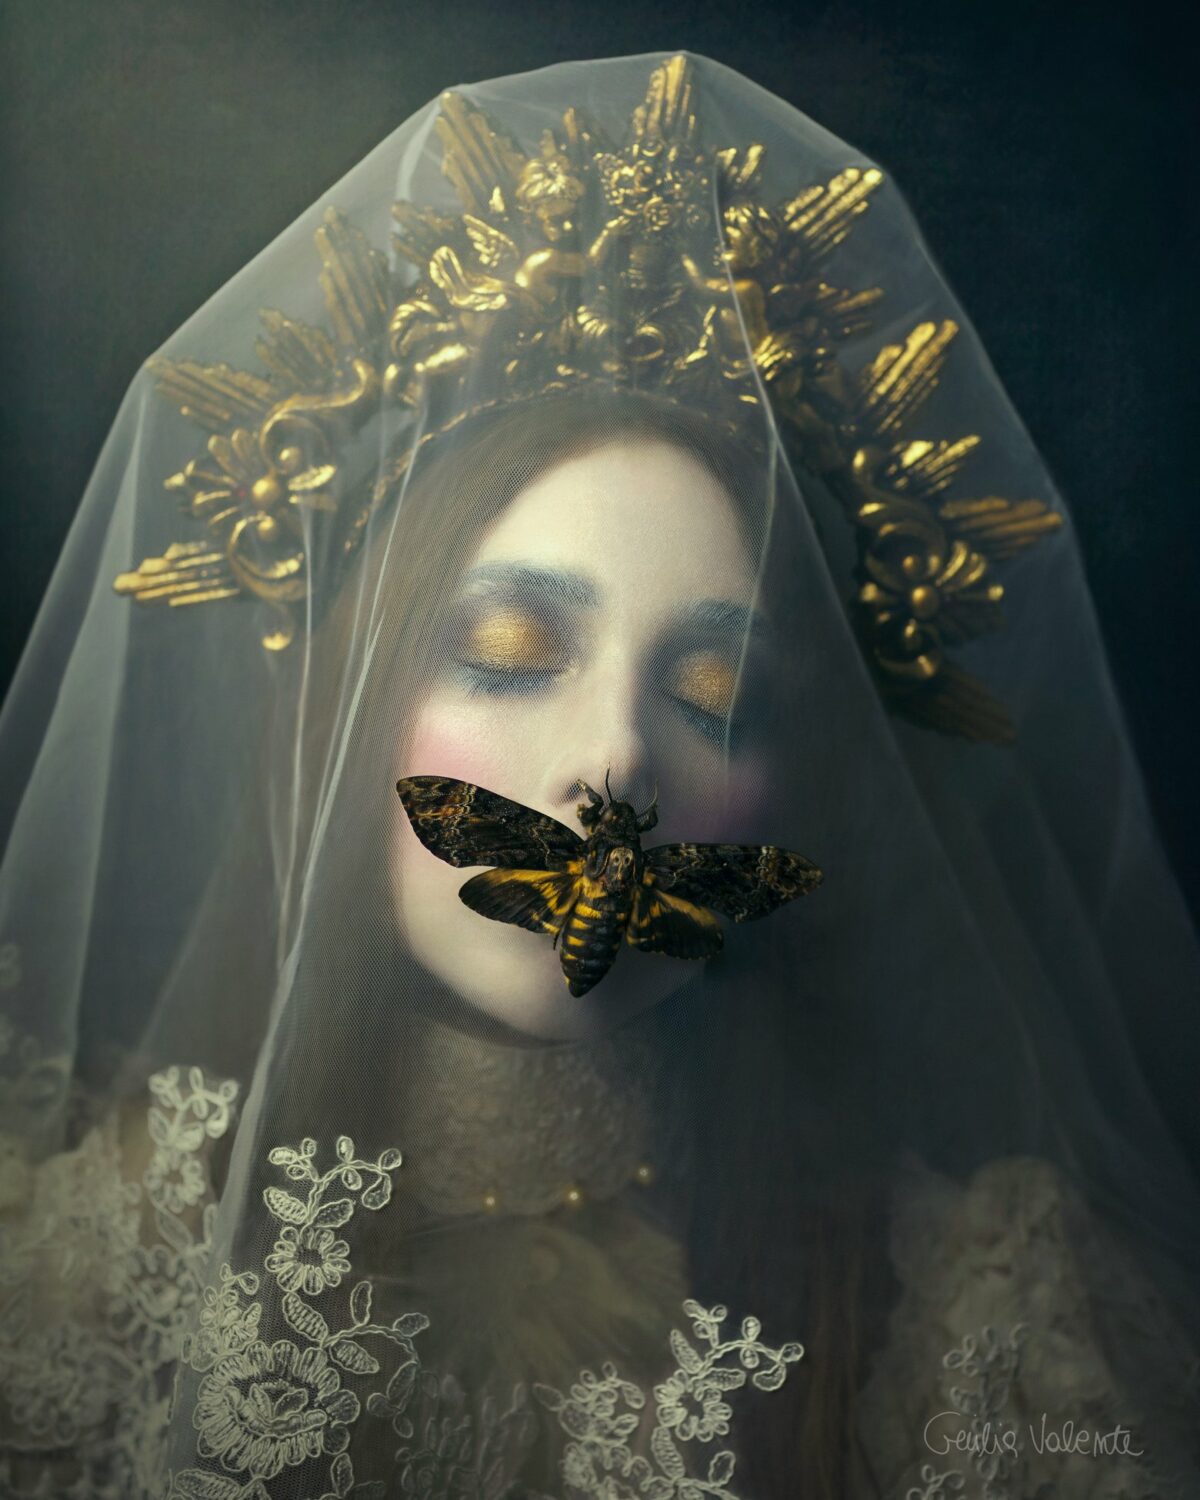 Wonderful Digital Collages Inspired By Renaissance And Vintage Aesthetics By Giulia Valente 1